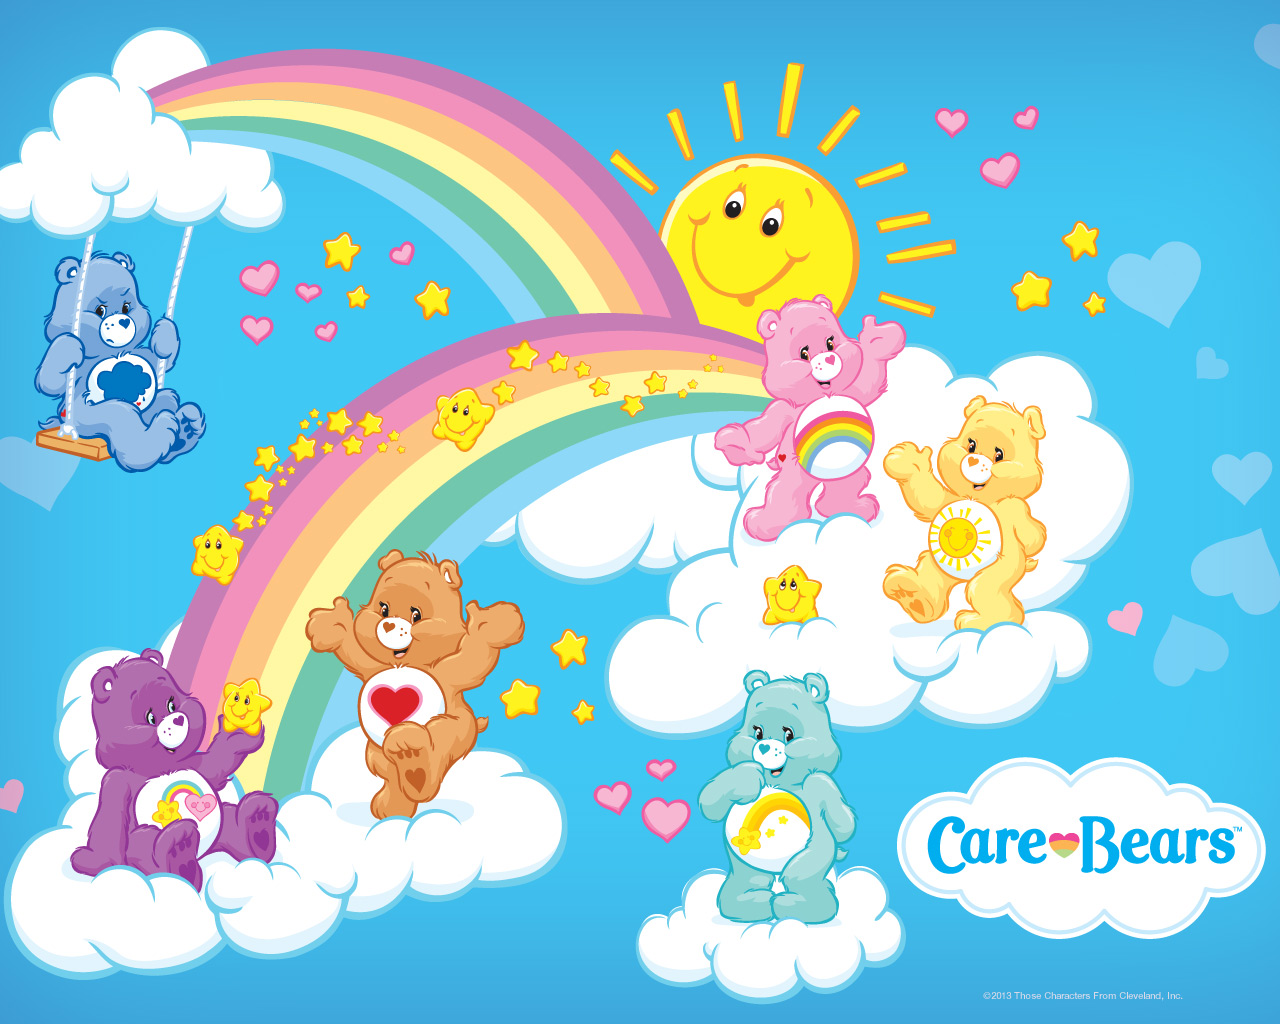 Care Bears Wallpaper Driverlayer Search Engine